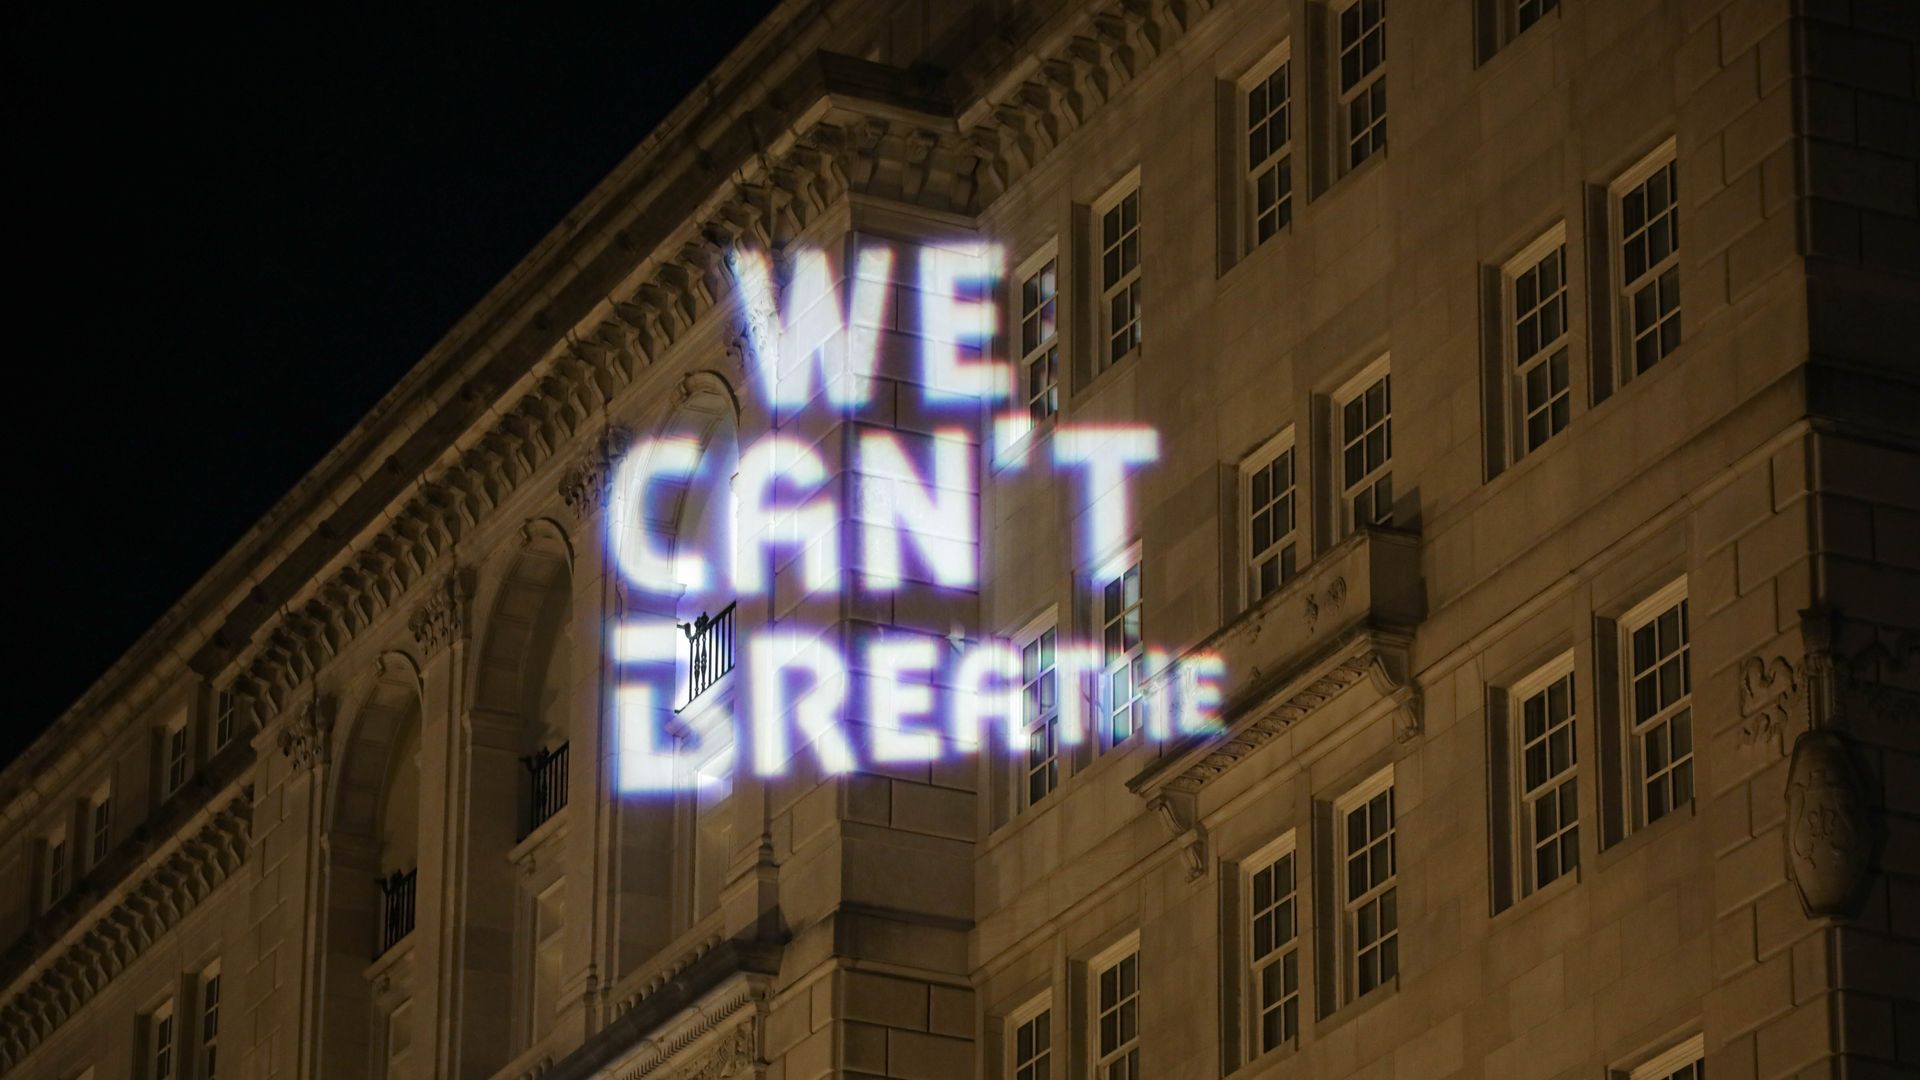 Projected text reading with "We can't breath" demonstrated by protesters